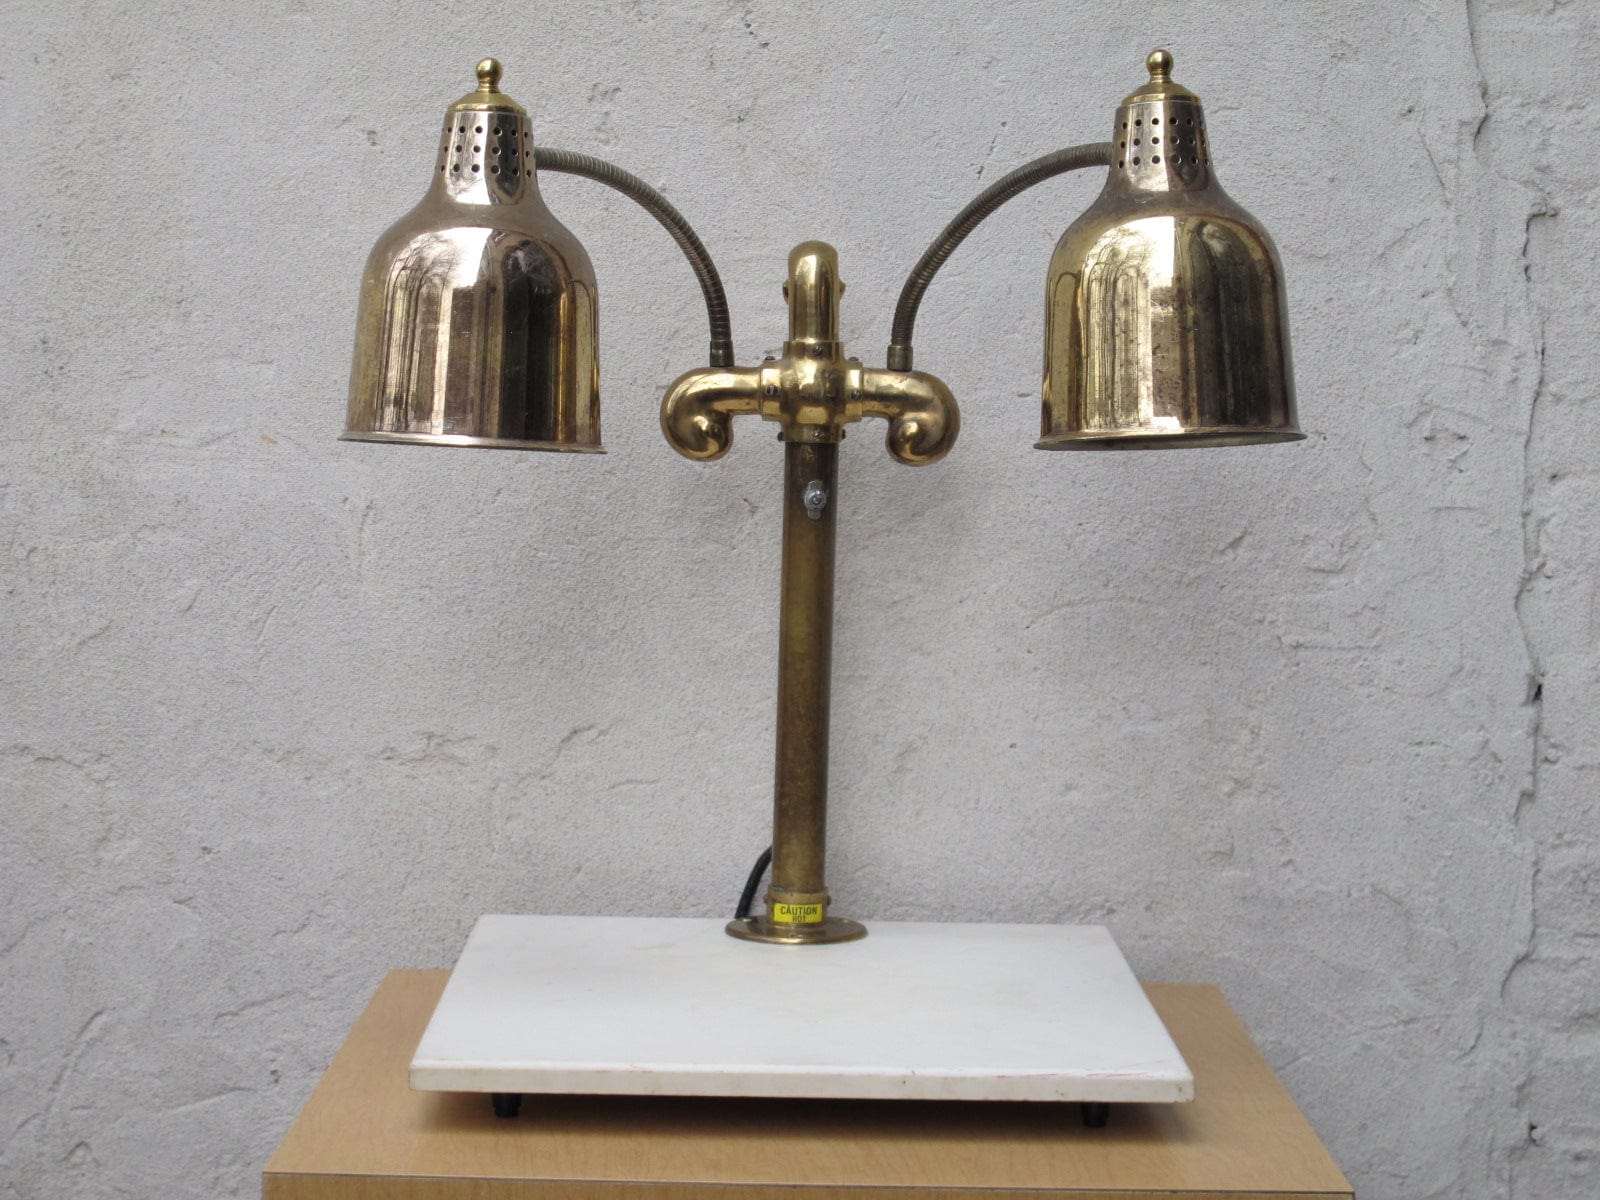 I Like Mike's Mid Century Modern lighting Hanson Brass Meat Carving Station with Double Heat Lamps